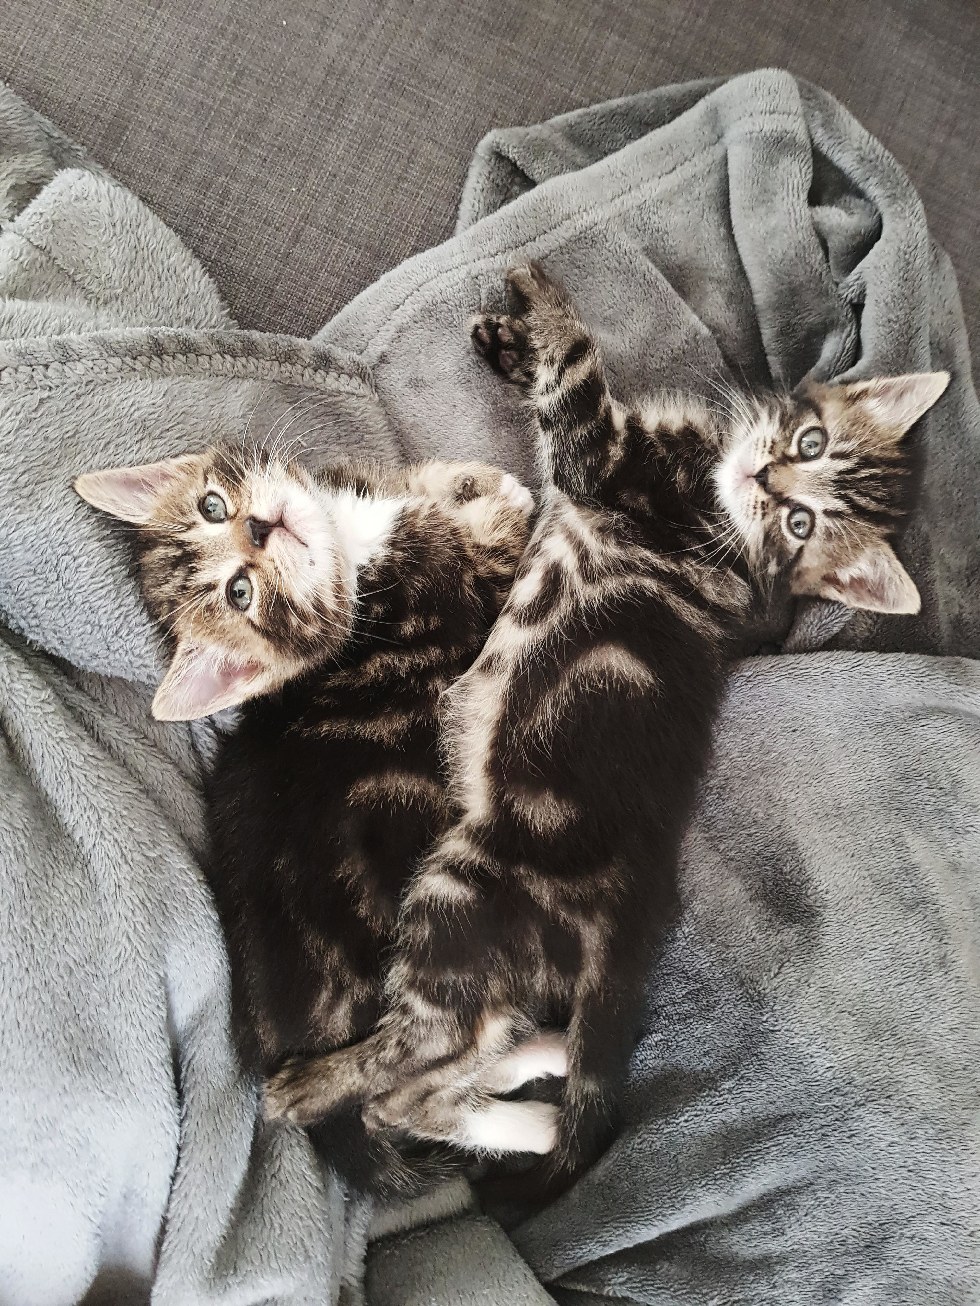 Woman Found Her Foster Kitten's Bonded Brother After They Were